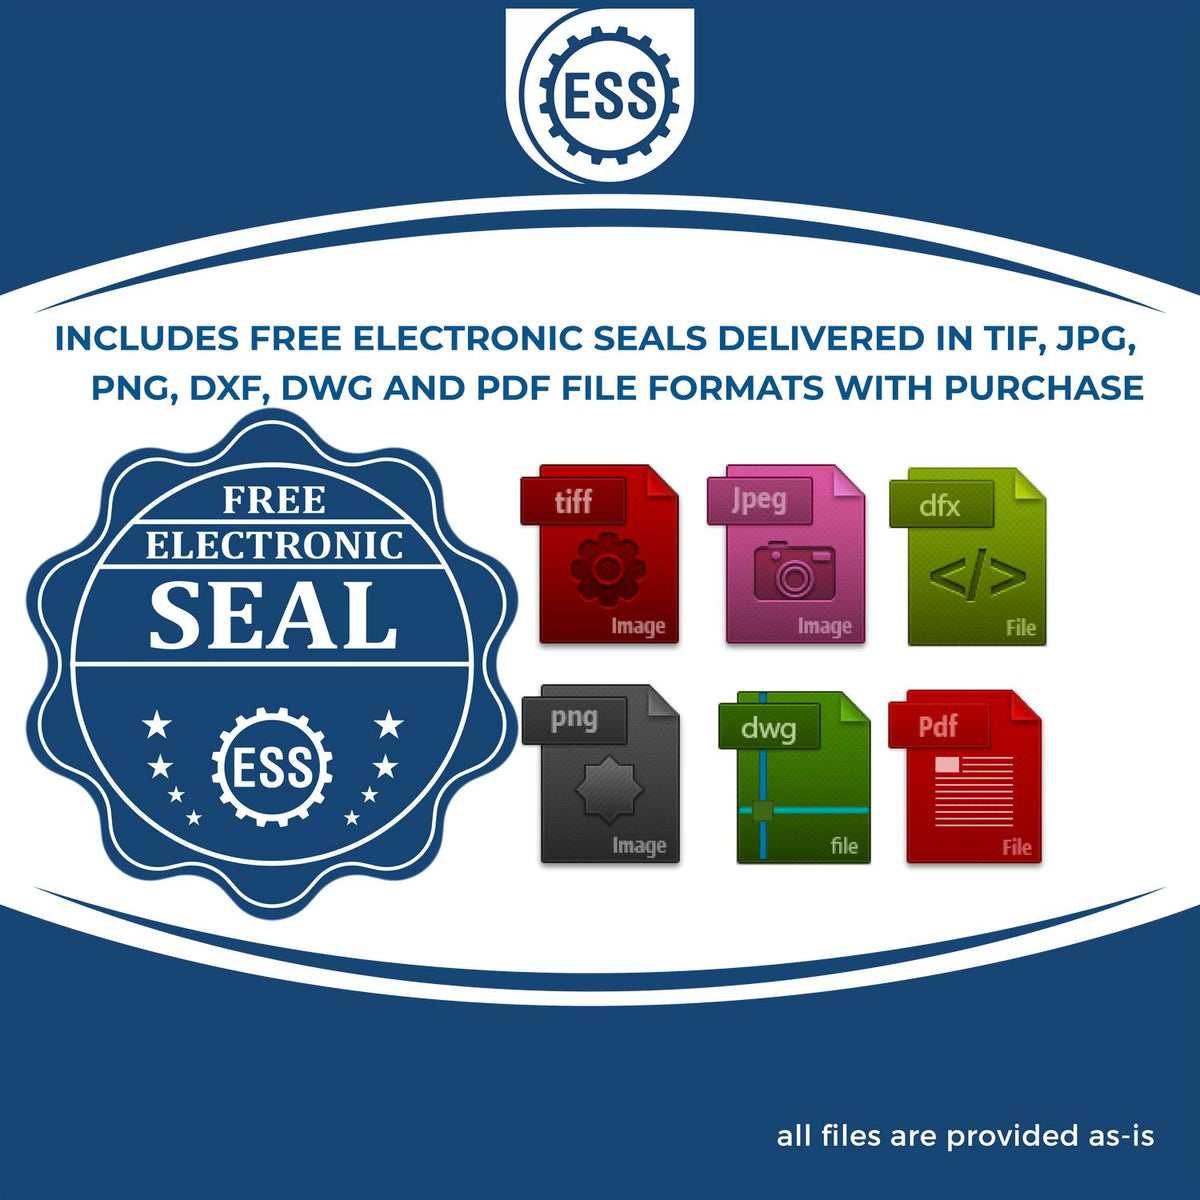 An infographic for the free electronic seal for the Soft Florida Professional Geologist Seal illustrating the different file type icons such as DXF, DWG, TIF, JPG and PNG.